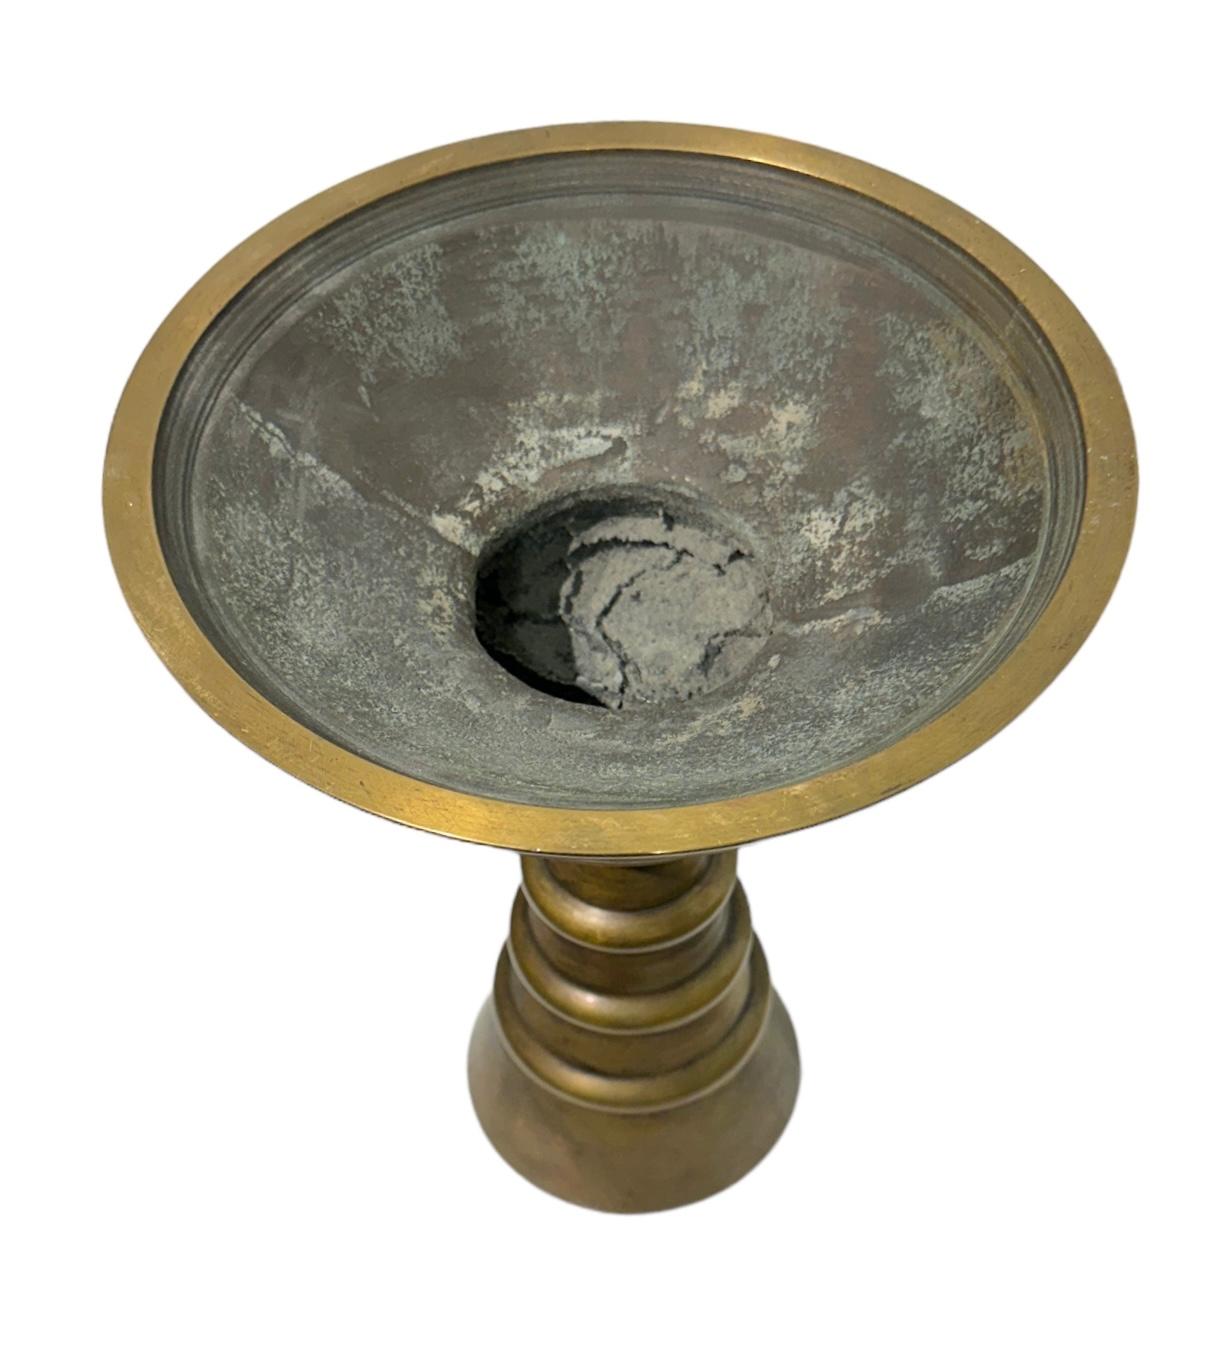 A remarkable example of minimalist design and natural form, this bronze vessel is both beautiful and functional.  This proto-type by designer Raju Peddada is a shift in contemporary decorative furnishings with an interactive design that reaches out